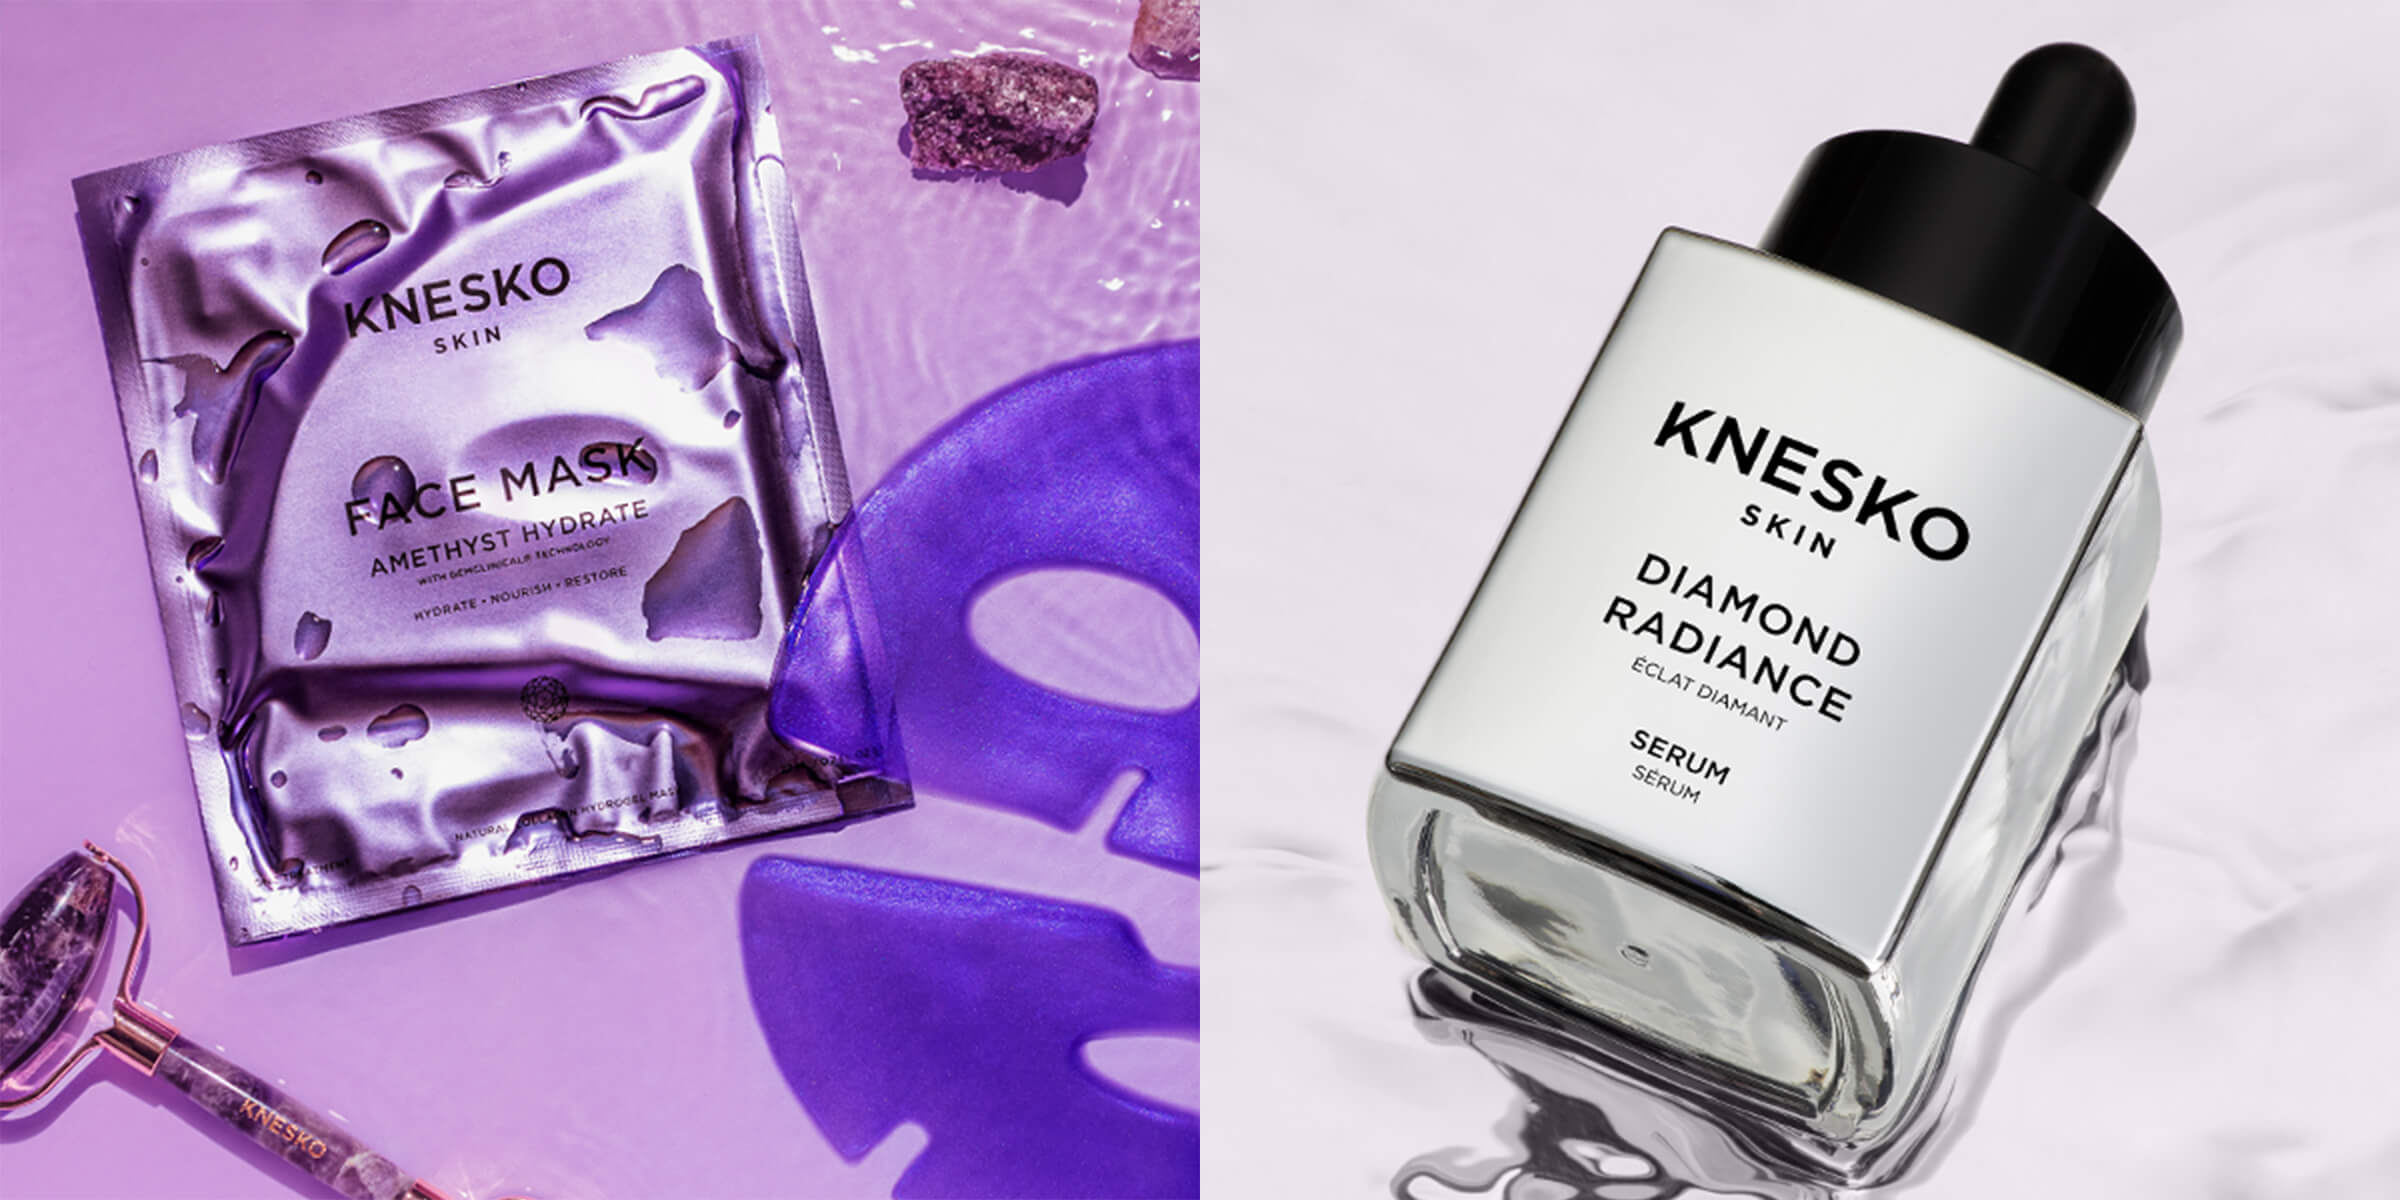 A Perfect Pair: Diamond Radiance Serum + Amethyst Hydrate Face Mask for Radiant, Hydrated Skin.